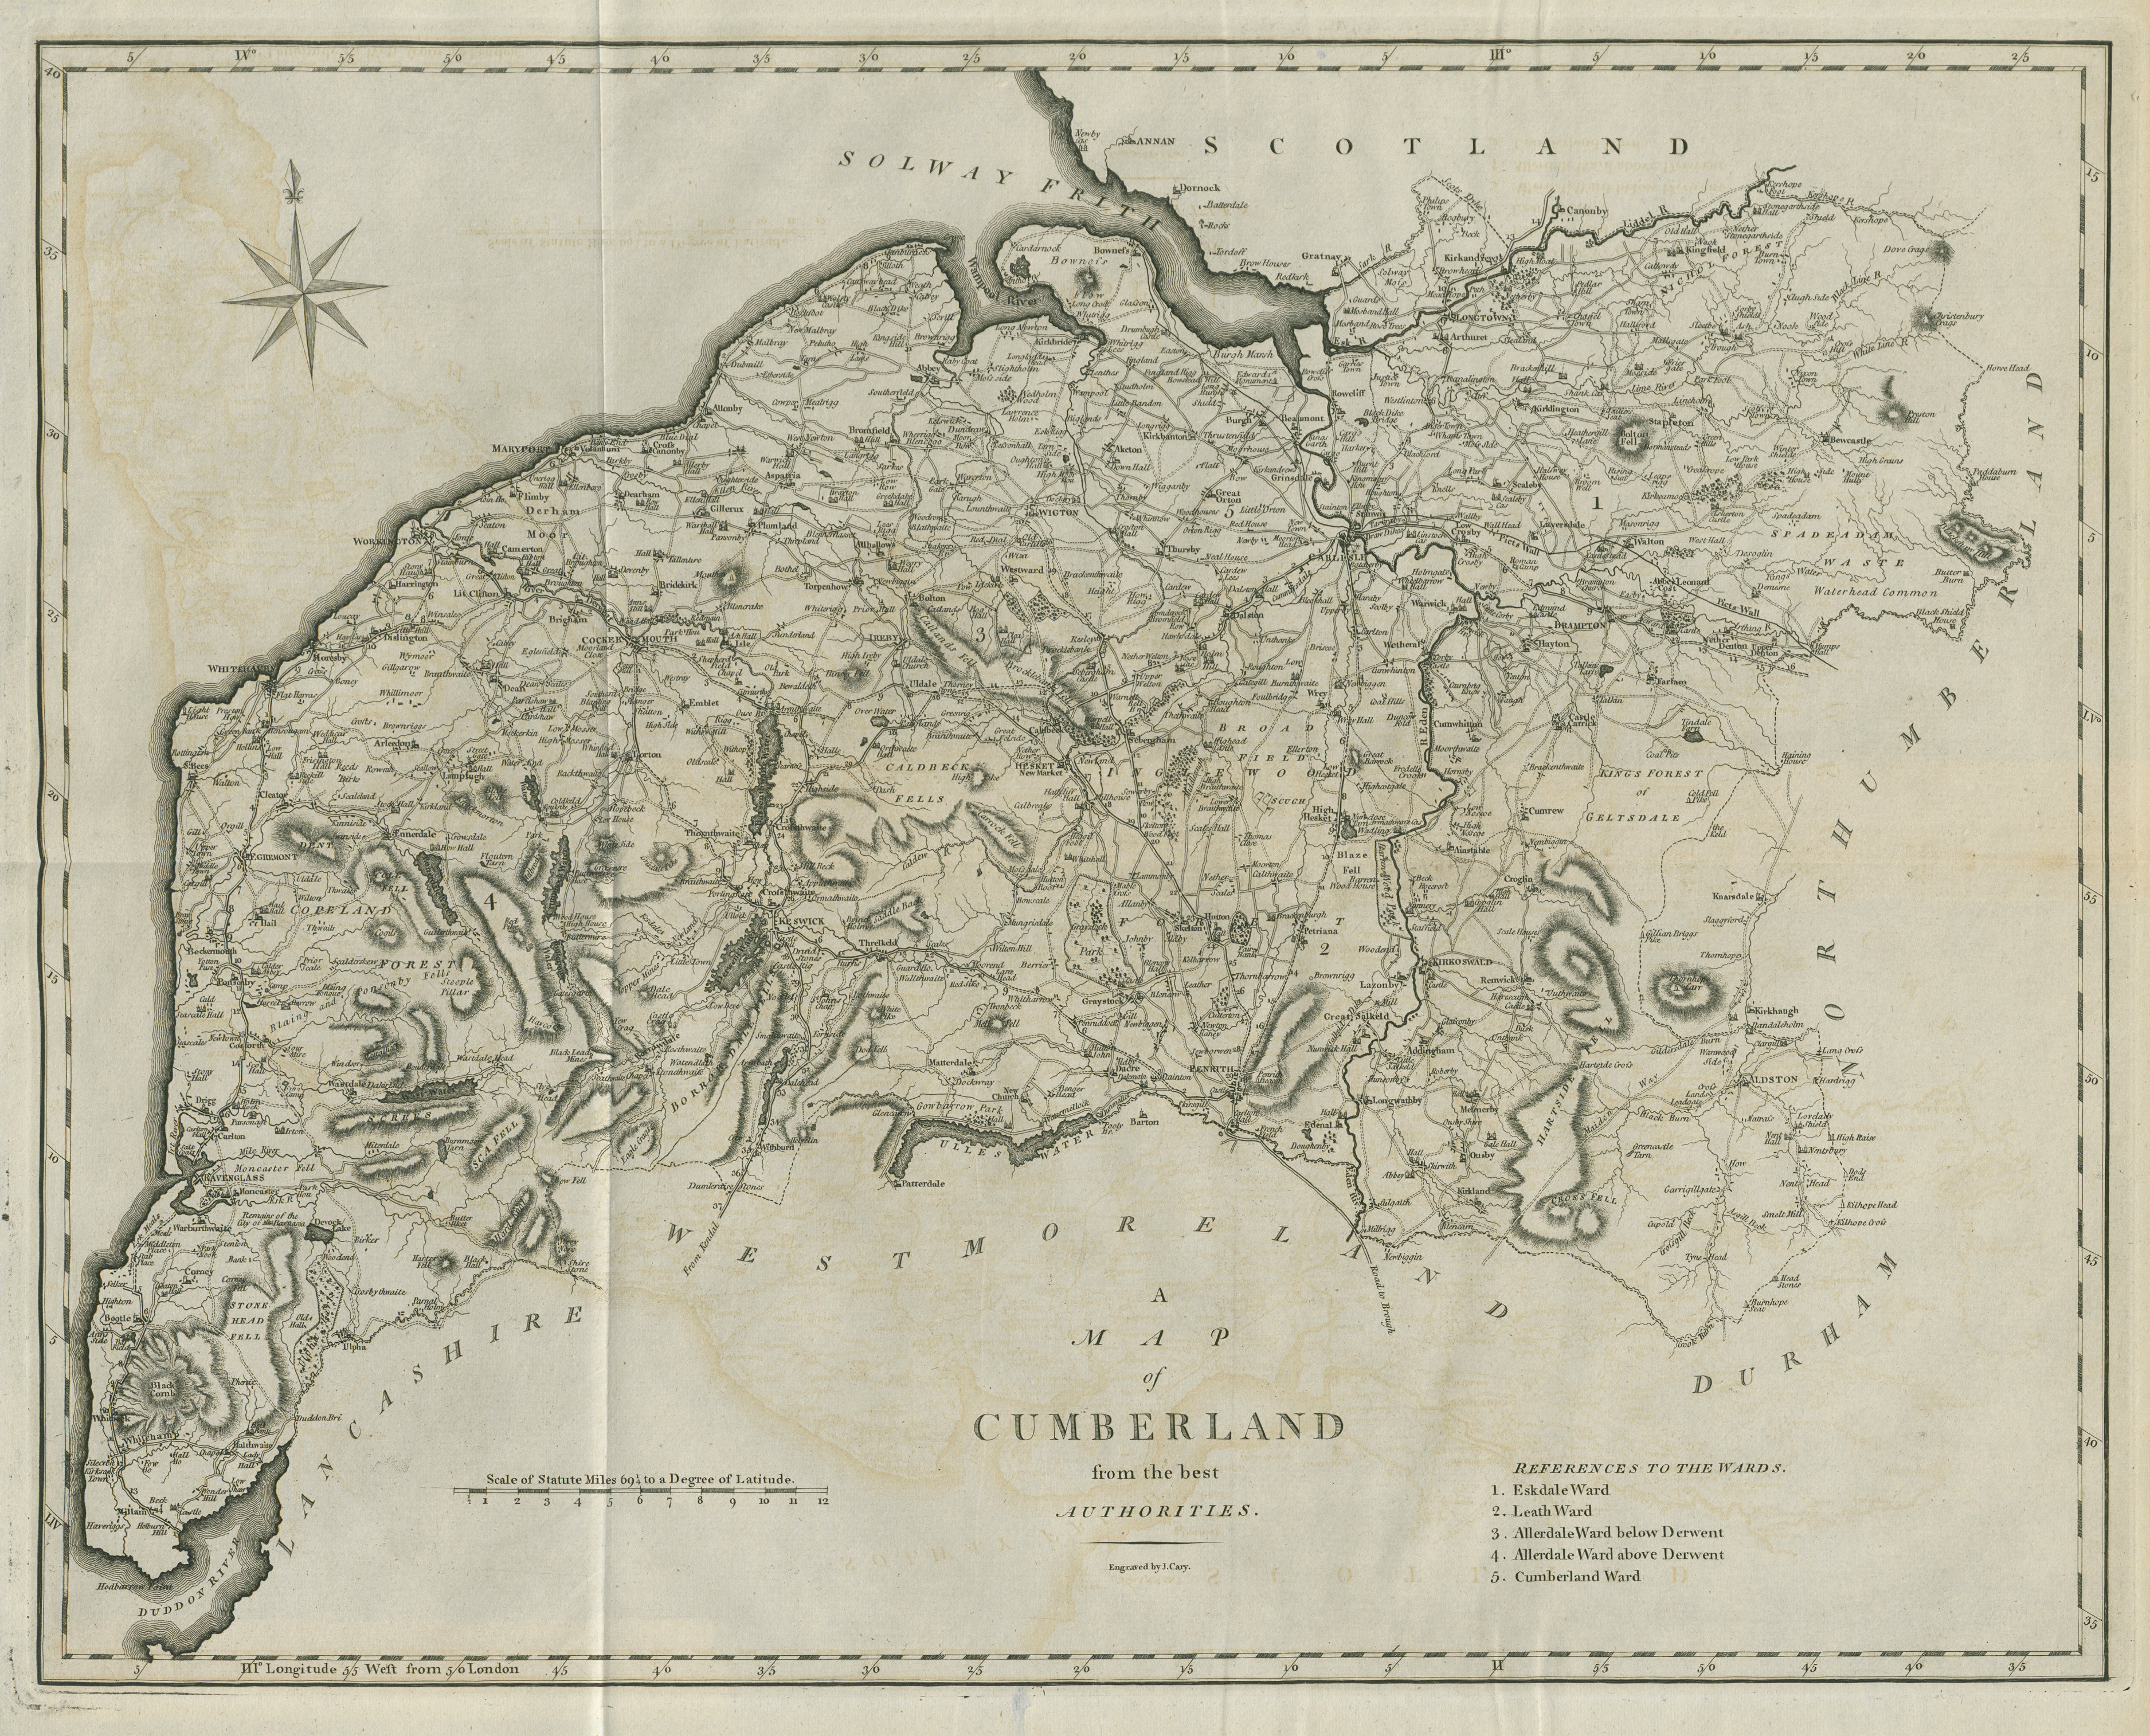 Associate Product A map of Cumberland from the best authorities. Cumbria county map. CARY 1789